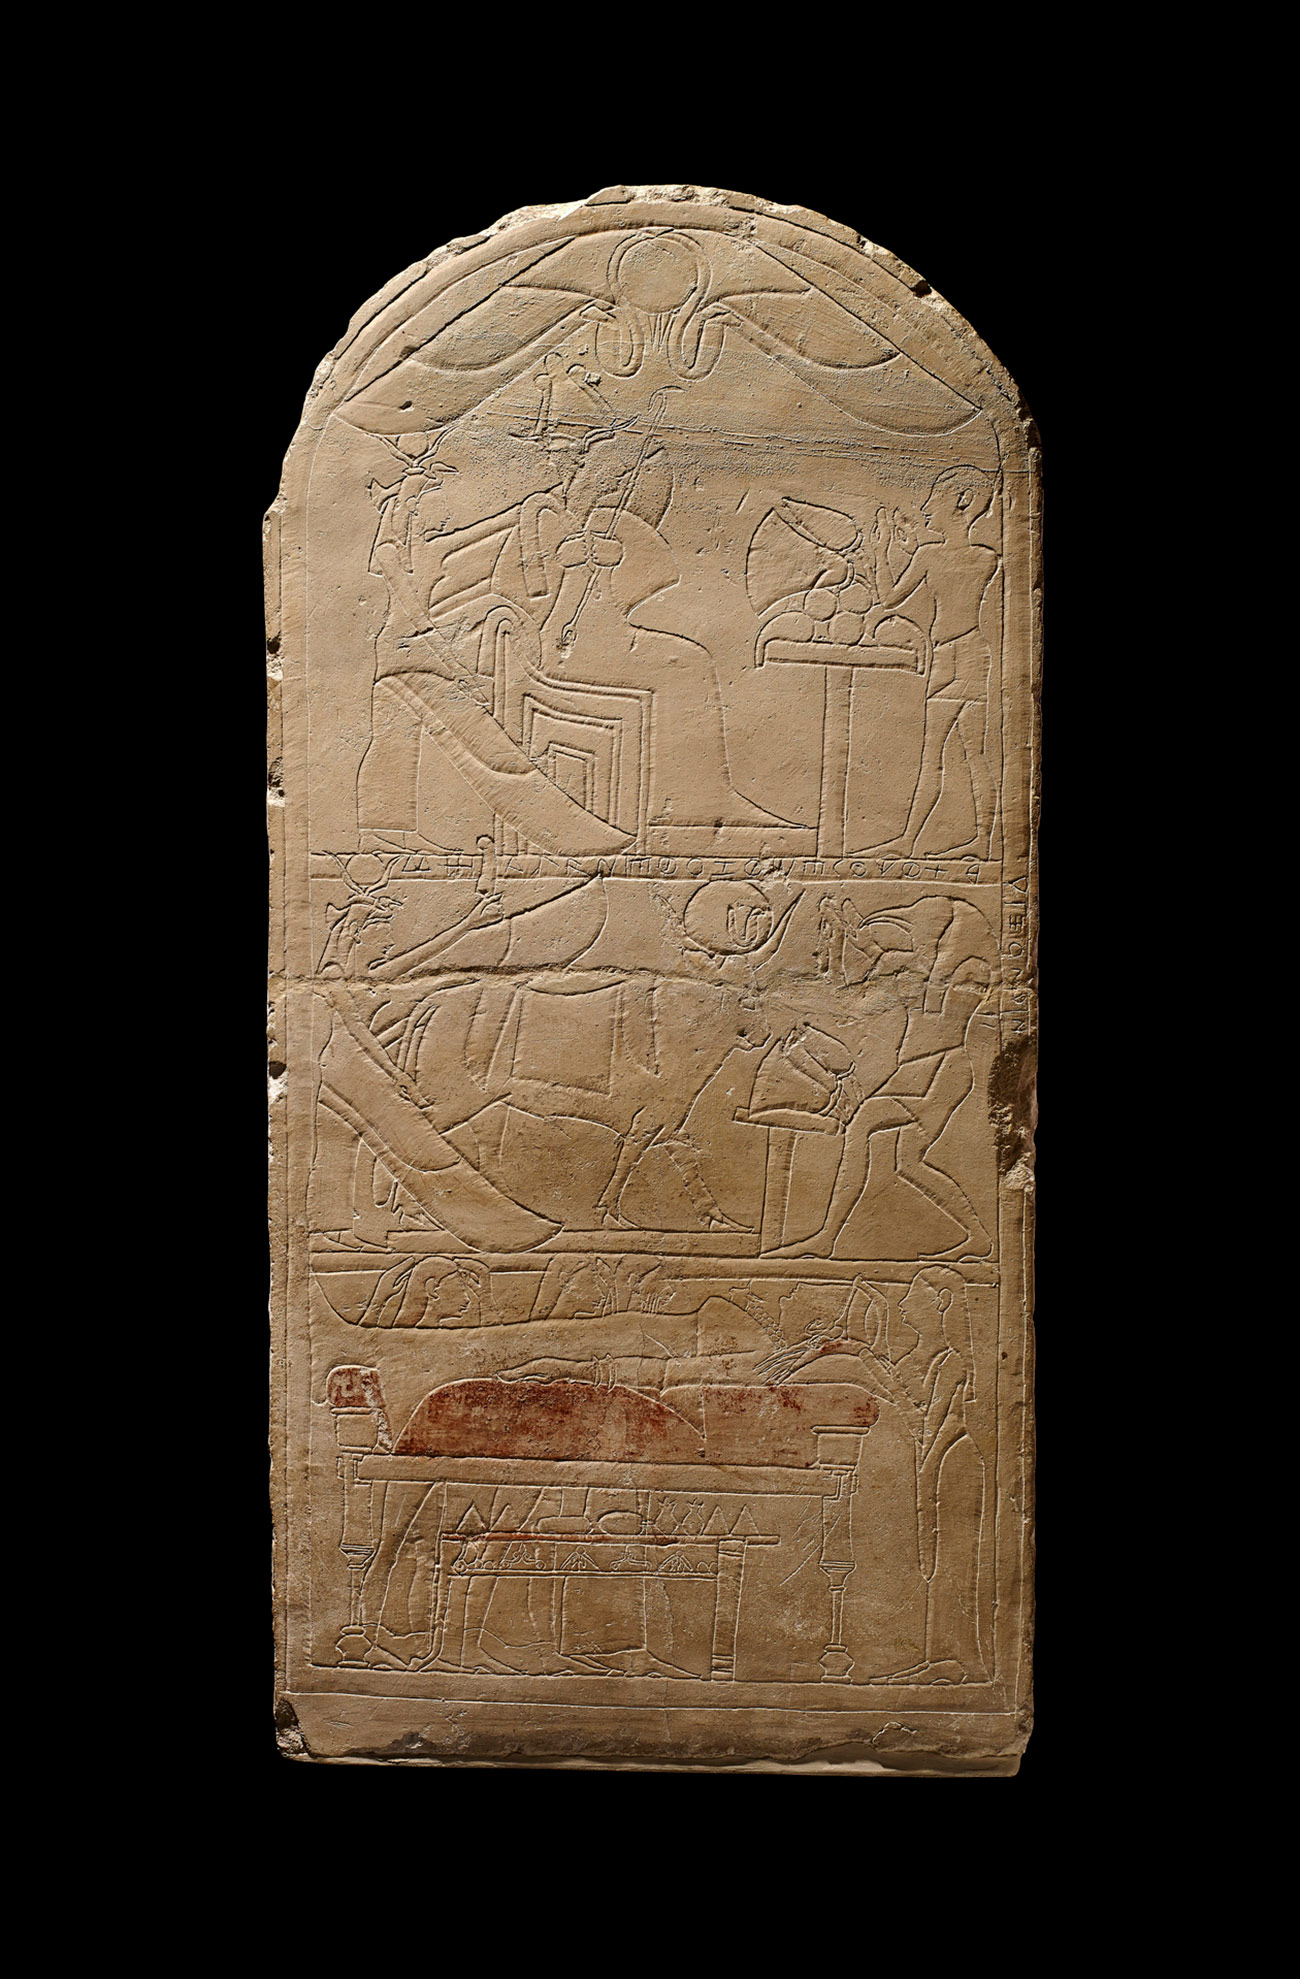 Funerary Stela with a Carian Inscription, 500s B.C., Egyptian. Limestone, 24 3/4 × 12 1/4 × 4 in. On loan from the Trustees of the British Museum, donated by Egypt Exploration Society, 1971. © The Trustees of the British Museum. Featured in the exhibition Beyond the Nile: Egypt and the Classical World